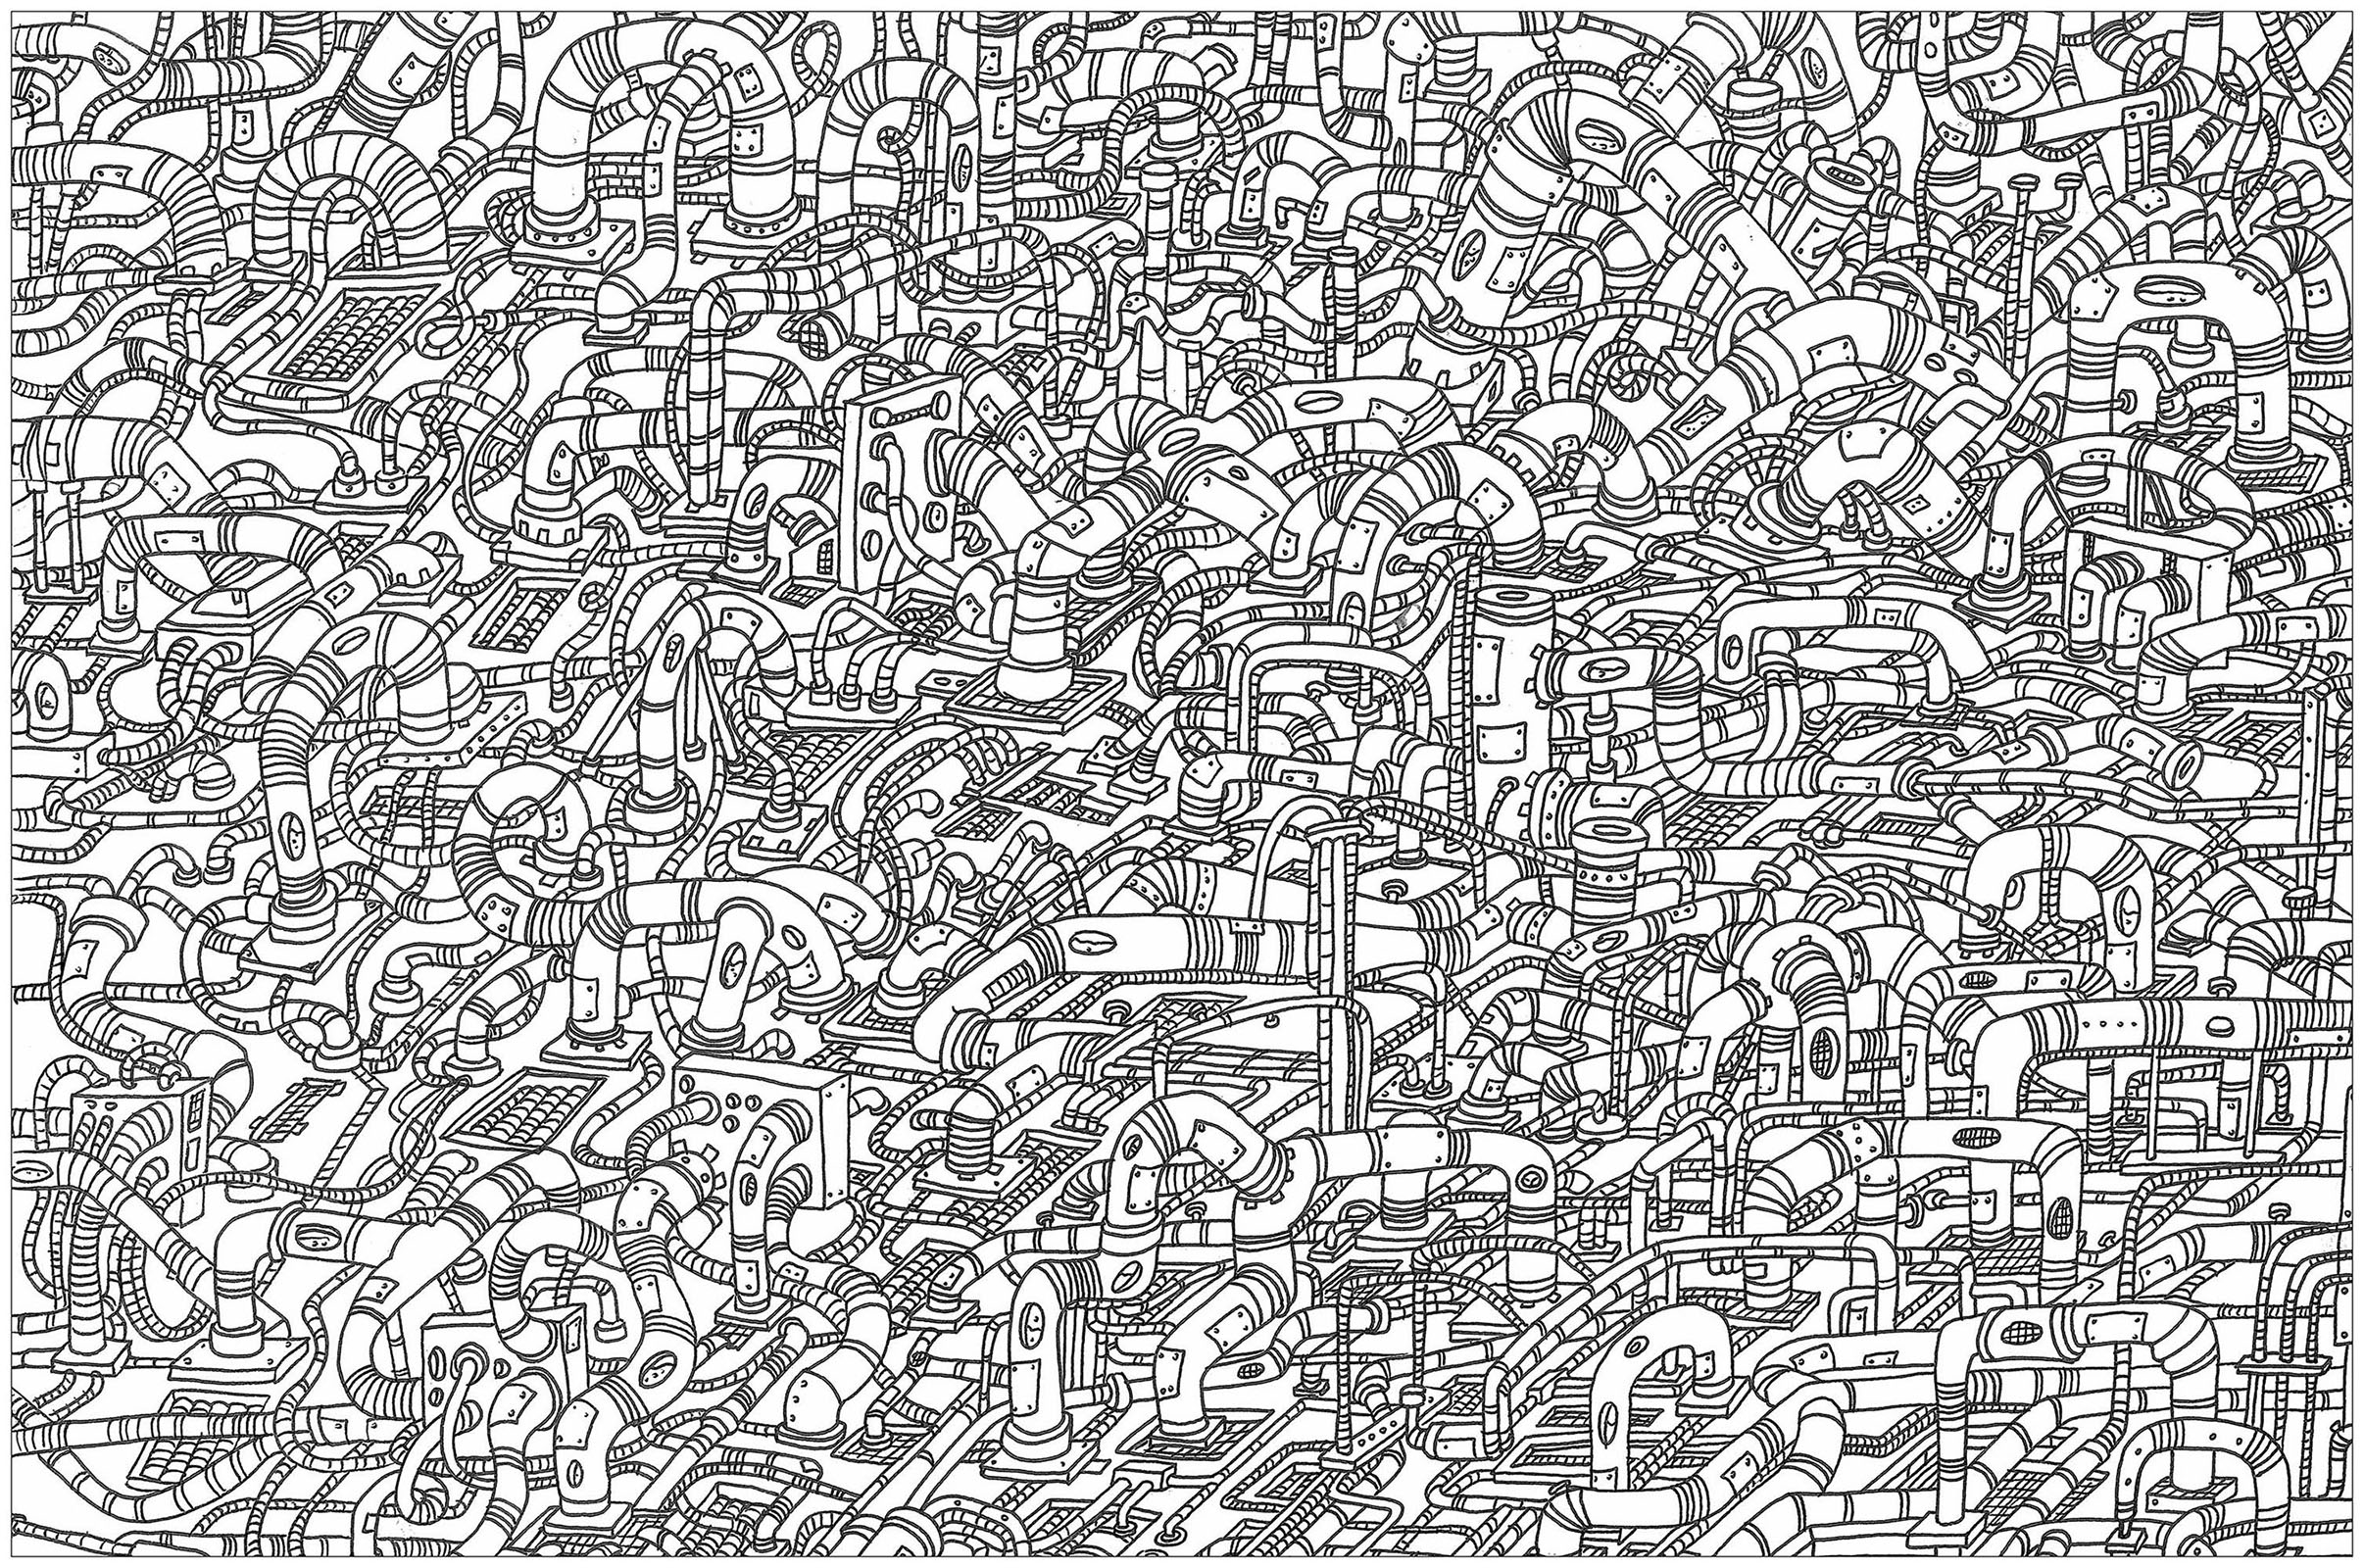 'Hoses', a complex coloring page, 'Where is Waldo ?' style, Artist : Frédéric Brogard